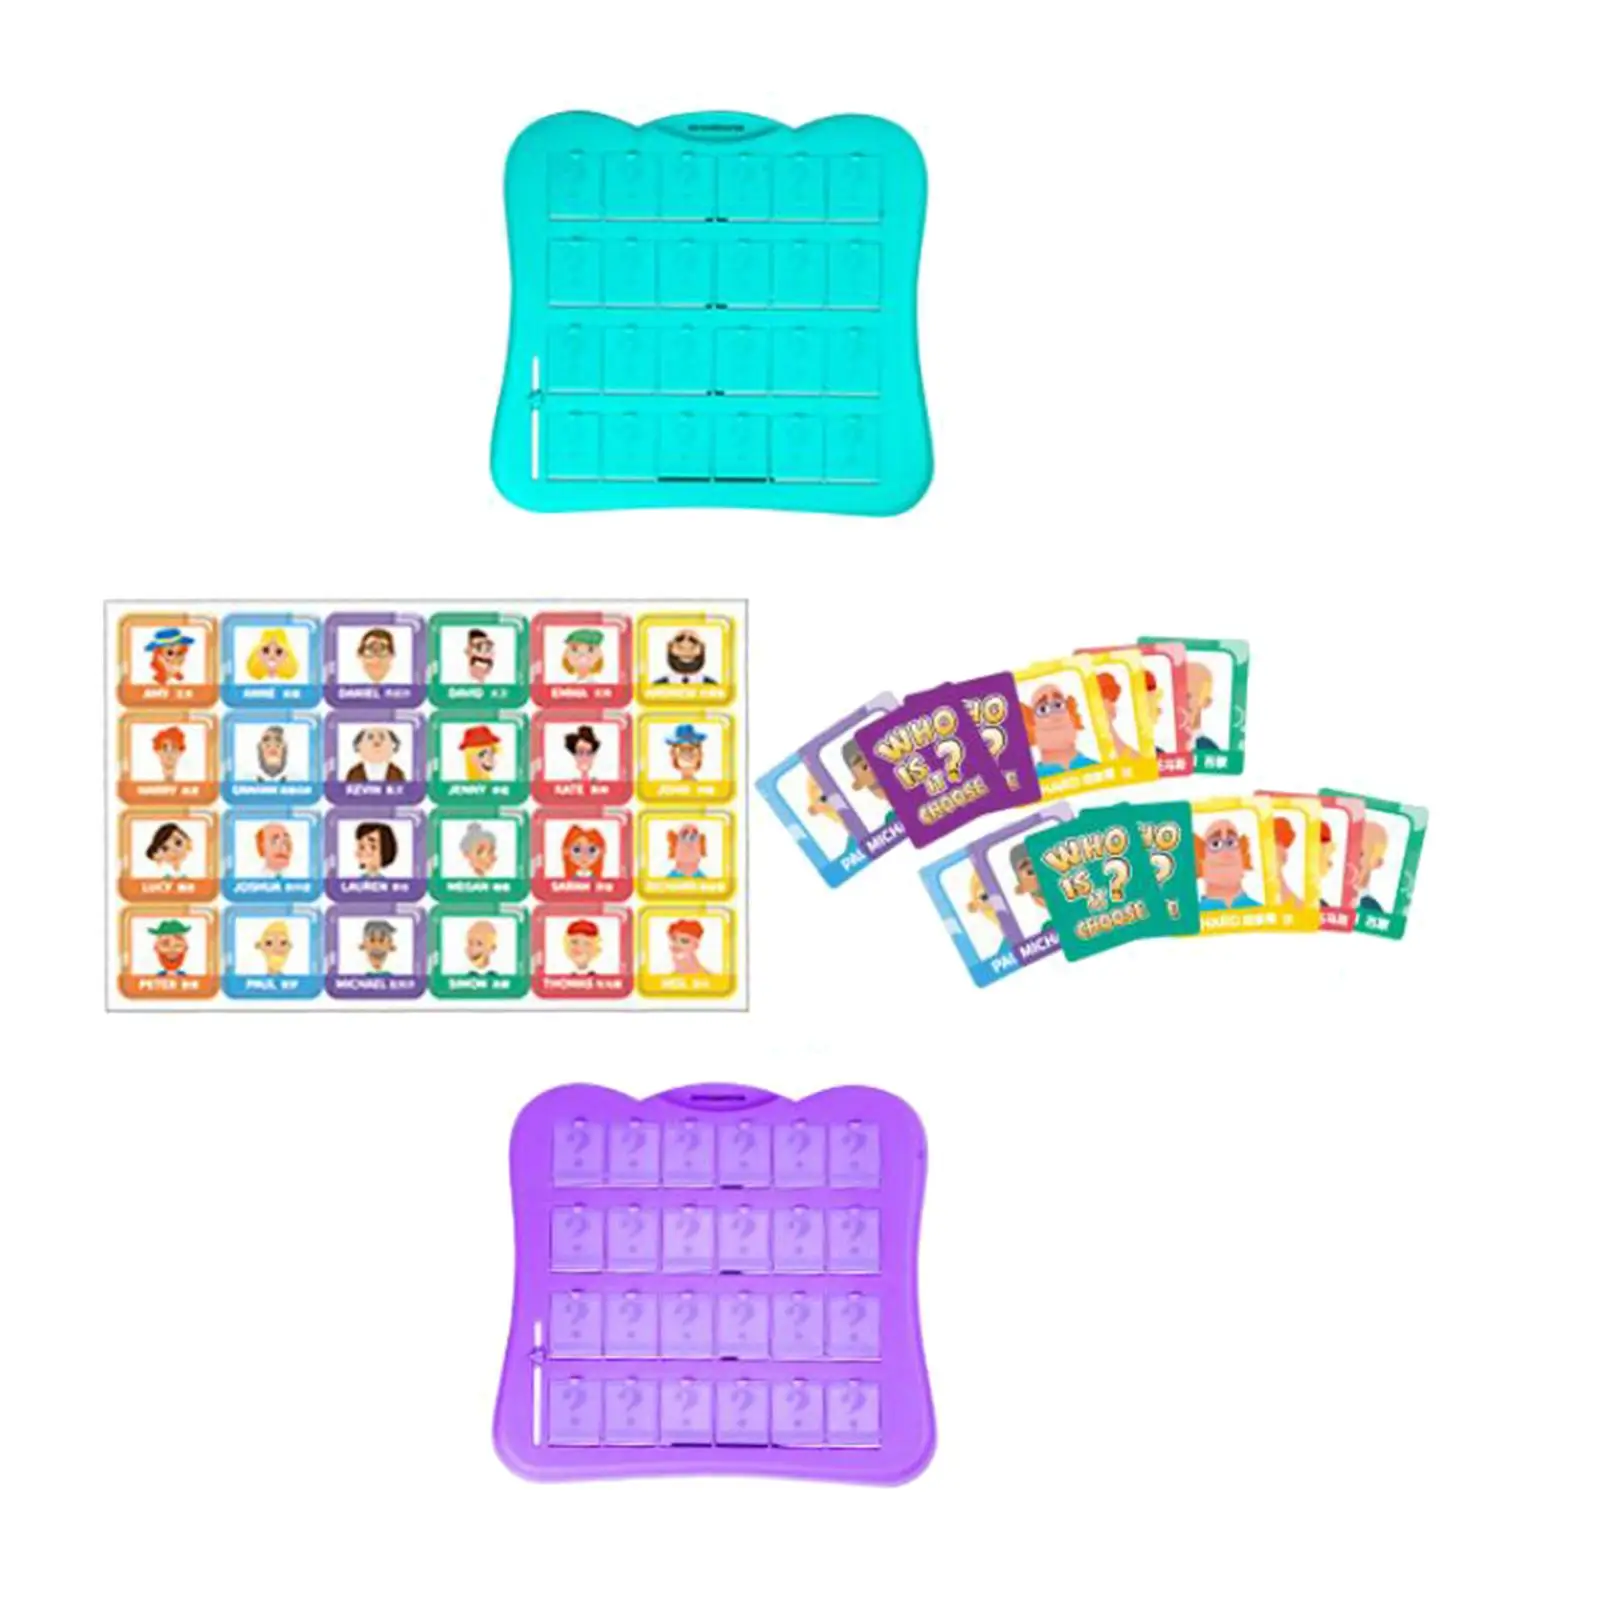 Guessing Who Game Novelty Interactive Puzzle Game Battle Game 2 Players for Girls Party Prop Travel Games Family Game Boys